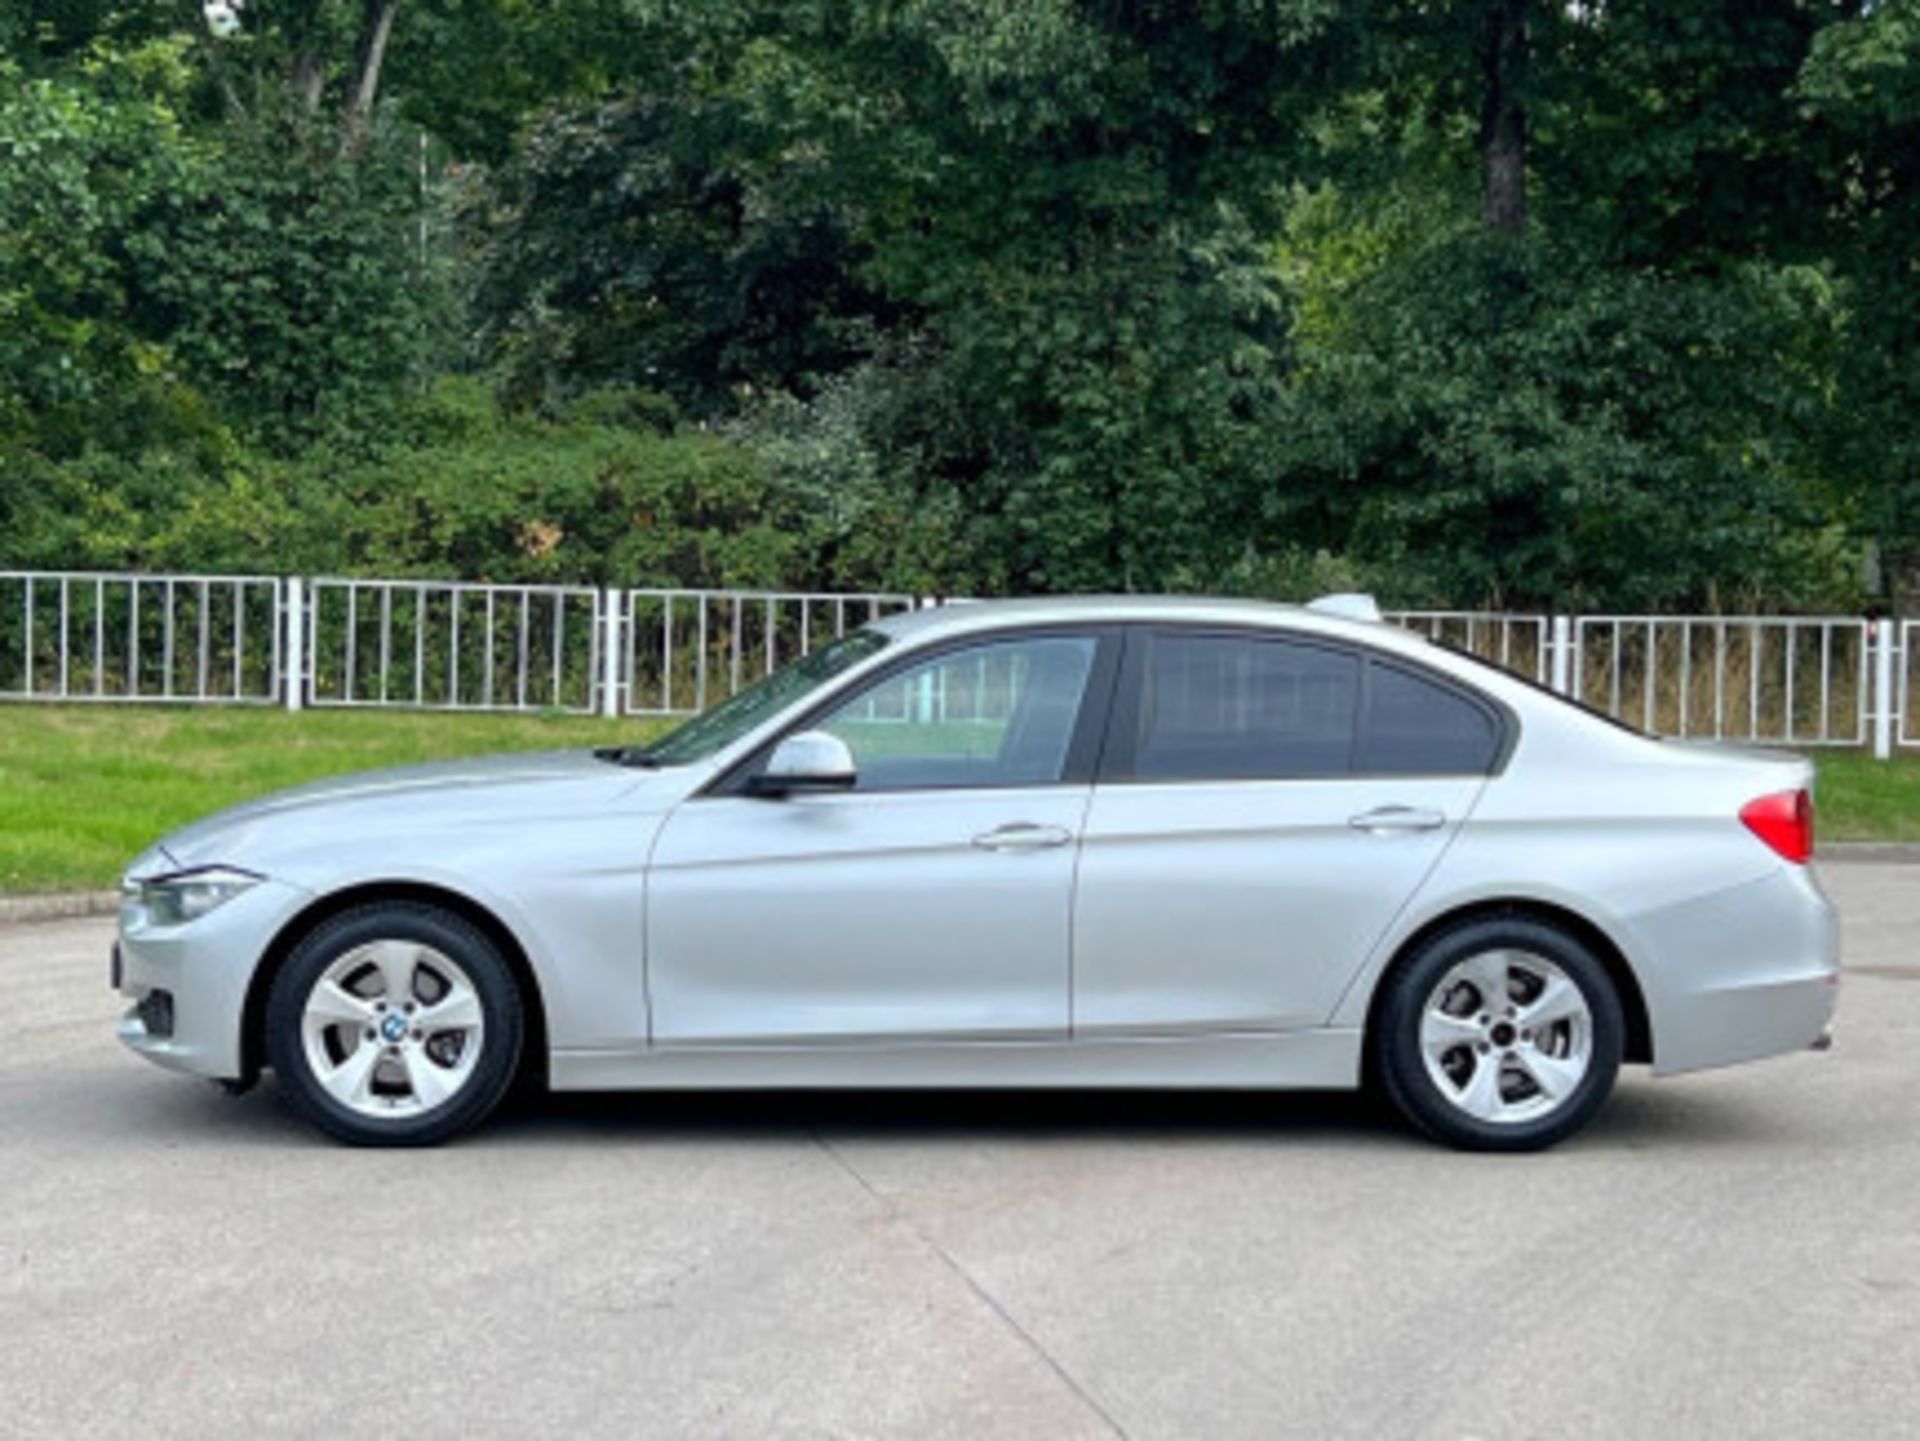 BMW 3 SERIES 2.0 DIESEL ED START STOP - A WELL-MAINTAINED GEM >>--NO VAT ON HAMMER--<< - Image 119 of 229